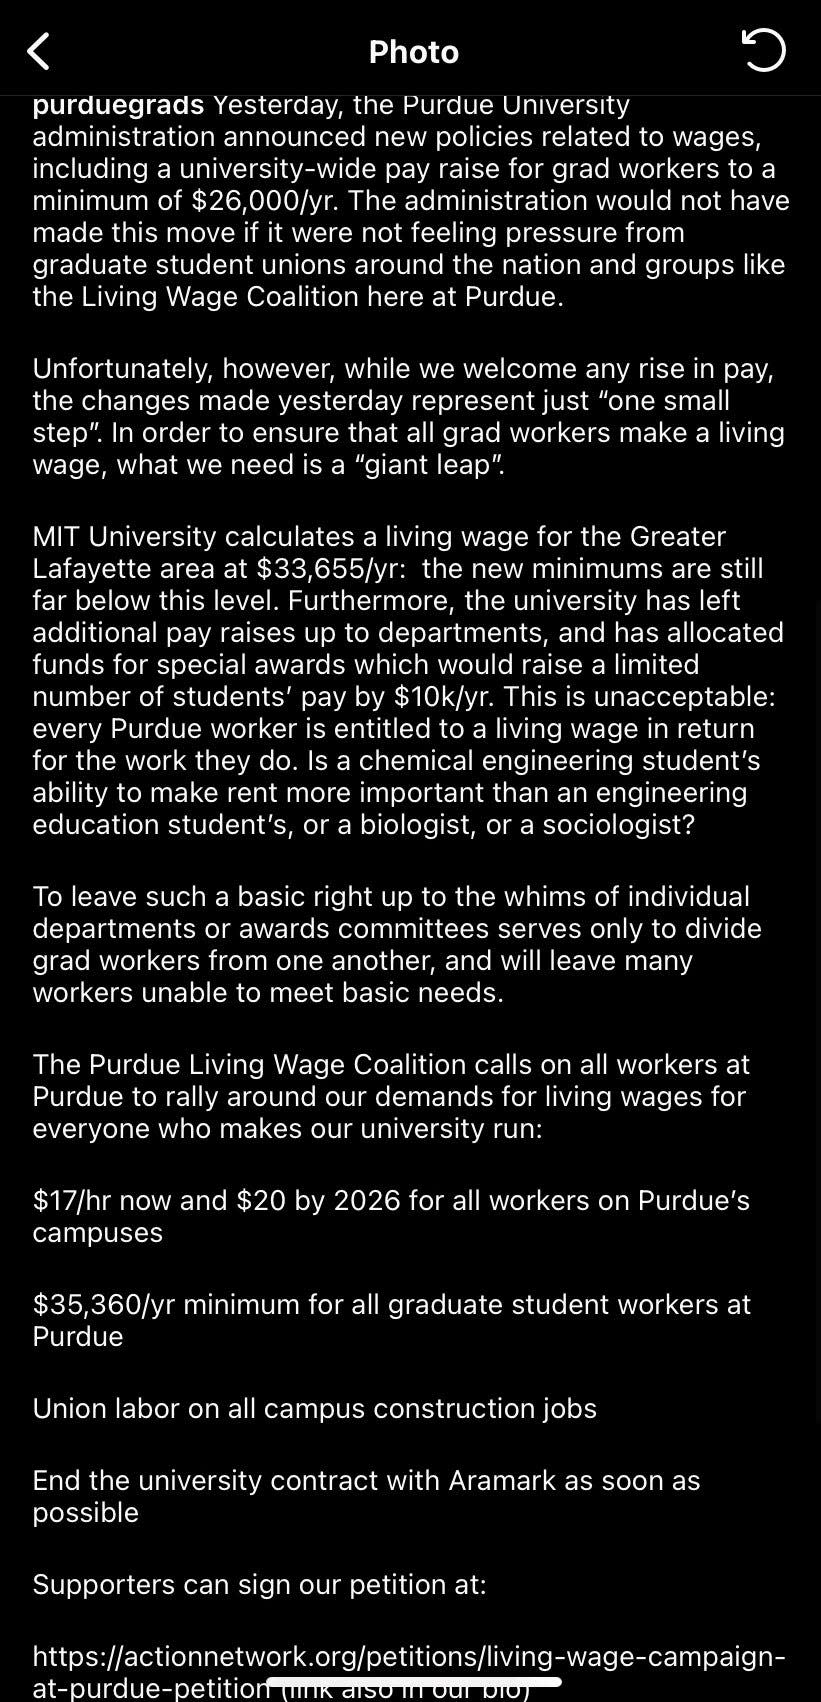 The post caption by the Instagram page "purduegrads", the page for the group Purdue GROW, in response to the university raising the minimum yearly stipend for graduate students.